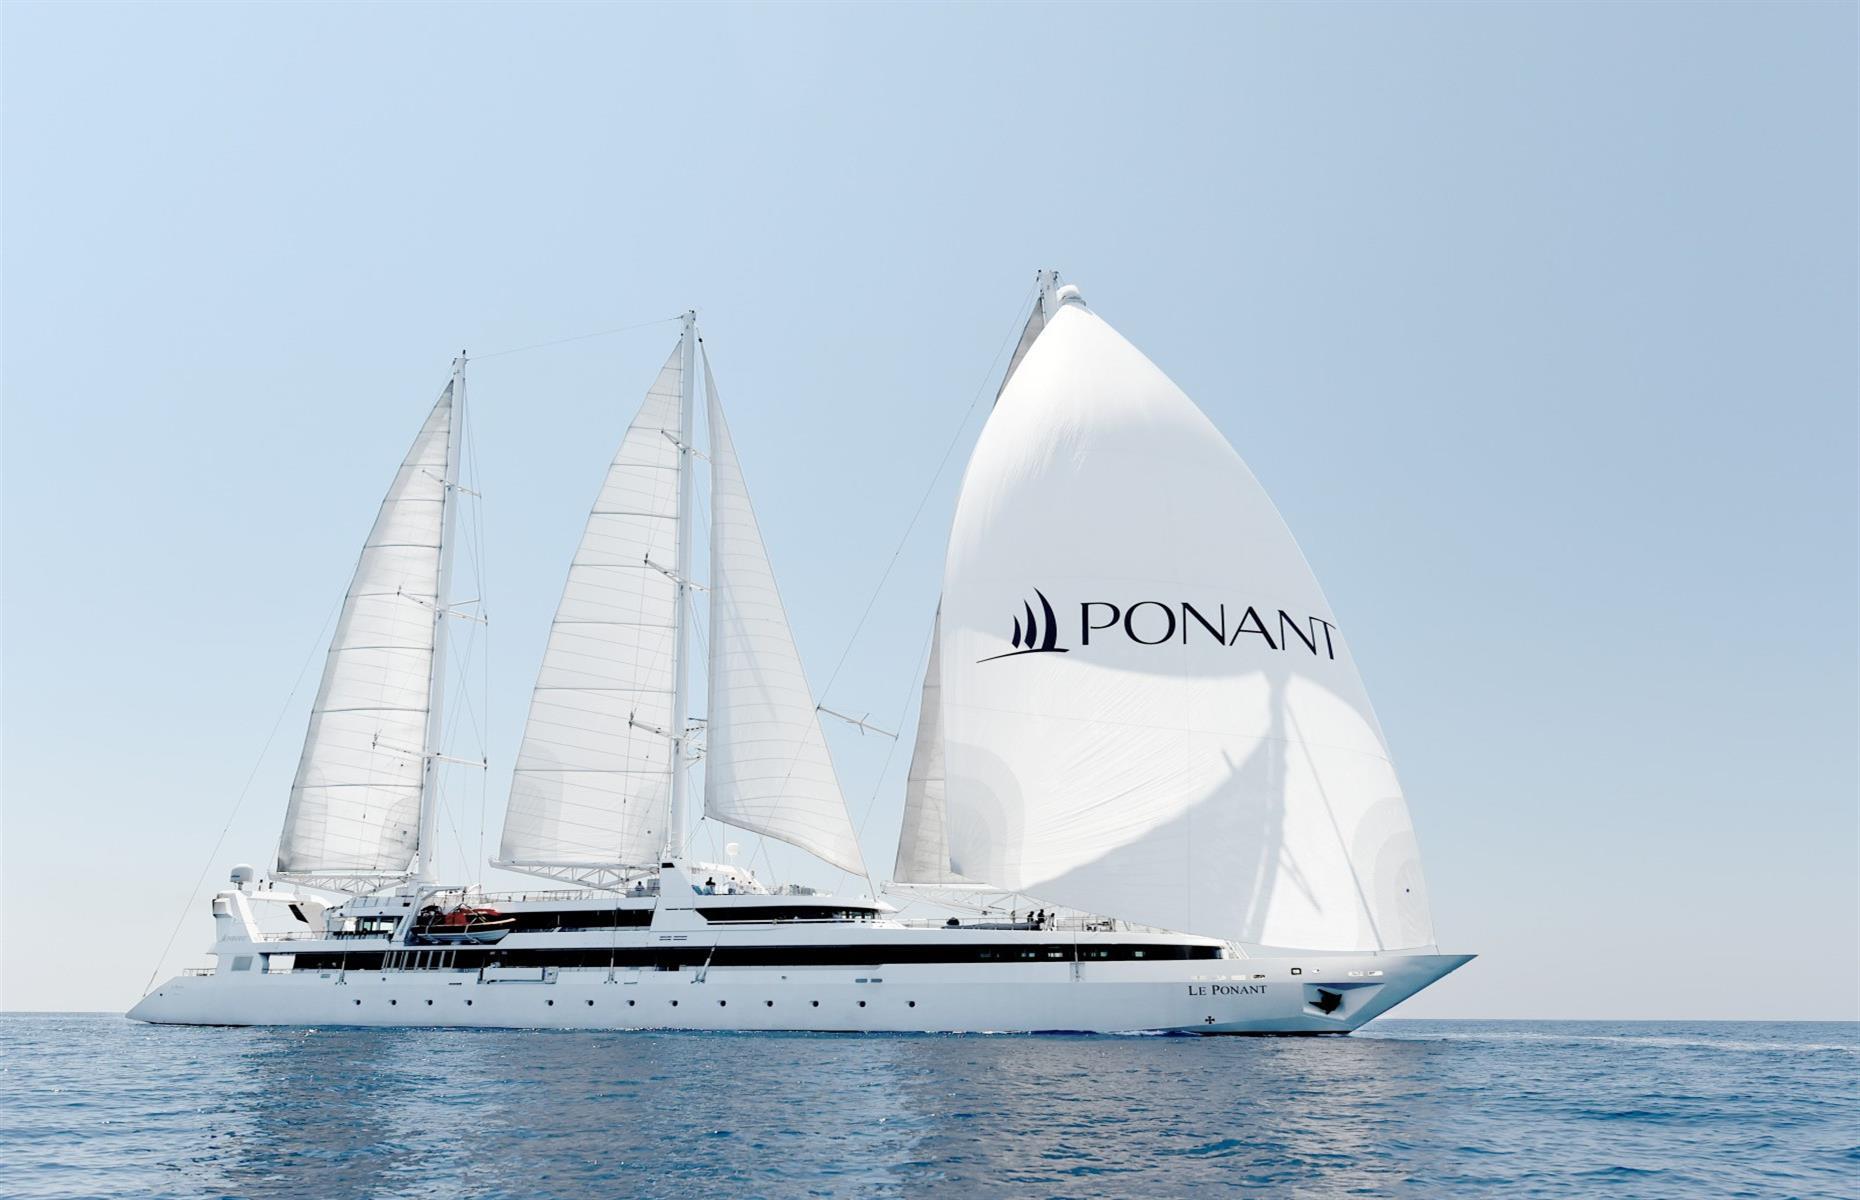 <p><a href="https://uk.ponant.com/le-ponant">Le Ponant</a> is the flagship vessel of French cruise company Ponant. The three-mast cruise yacht, which relaunched in summer 2022, has undergone a complete refit and refurbishment. Designed by French studio Jean-Philippe Nuel, her common areas have refined, clean lines with an elegant finish. The colour palette – consisting of off-white, taupe and caviar grey – reflect the classic, sophisticated style, with no need for embellishments or bling.</p>